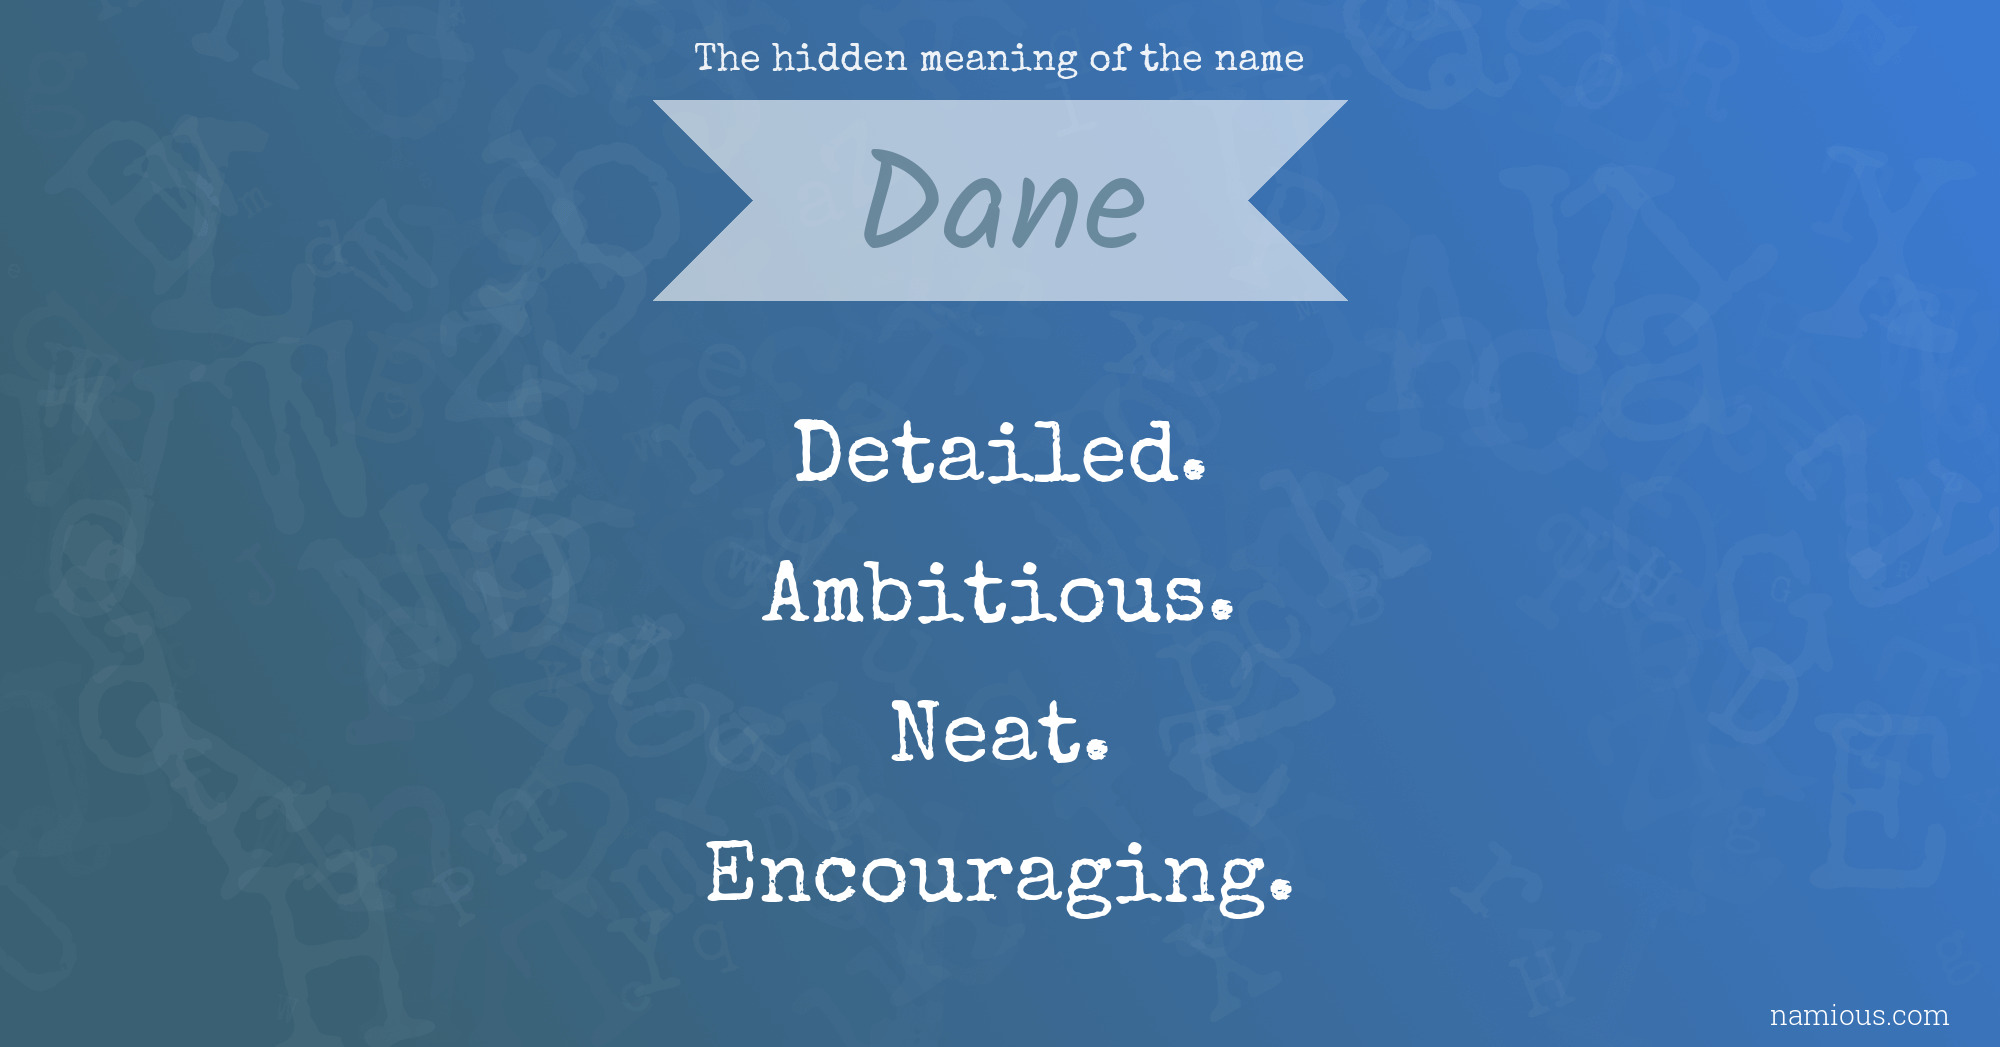 The hidden meaning of the name Dane